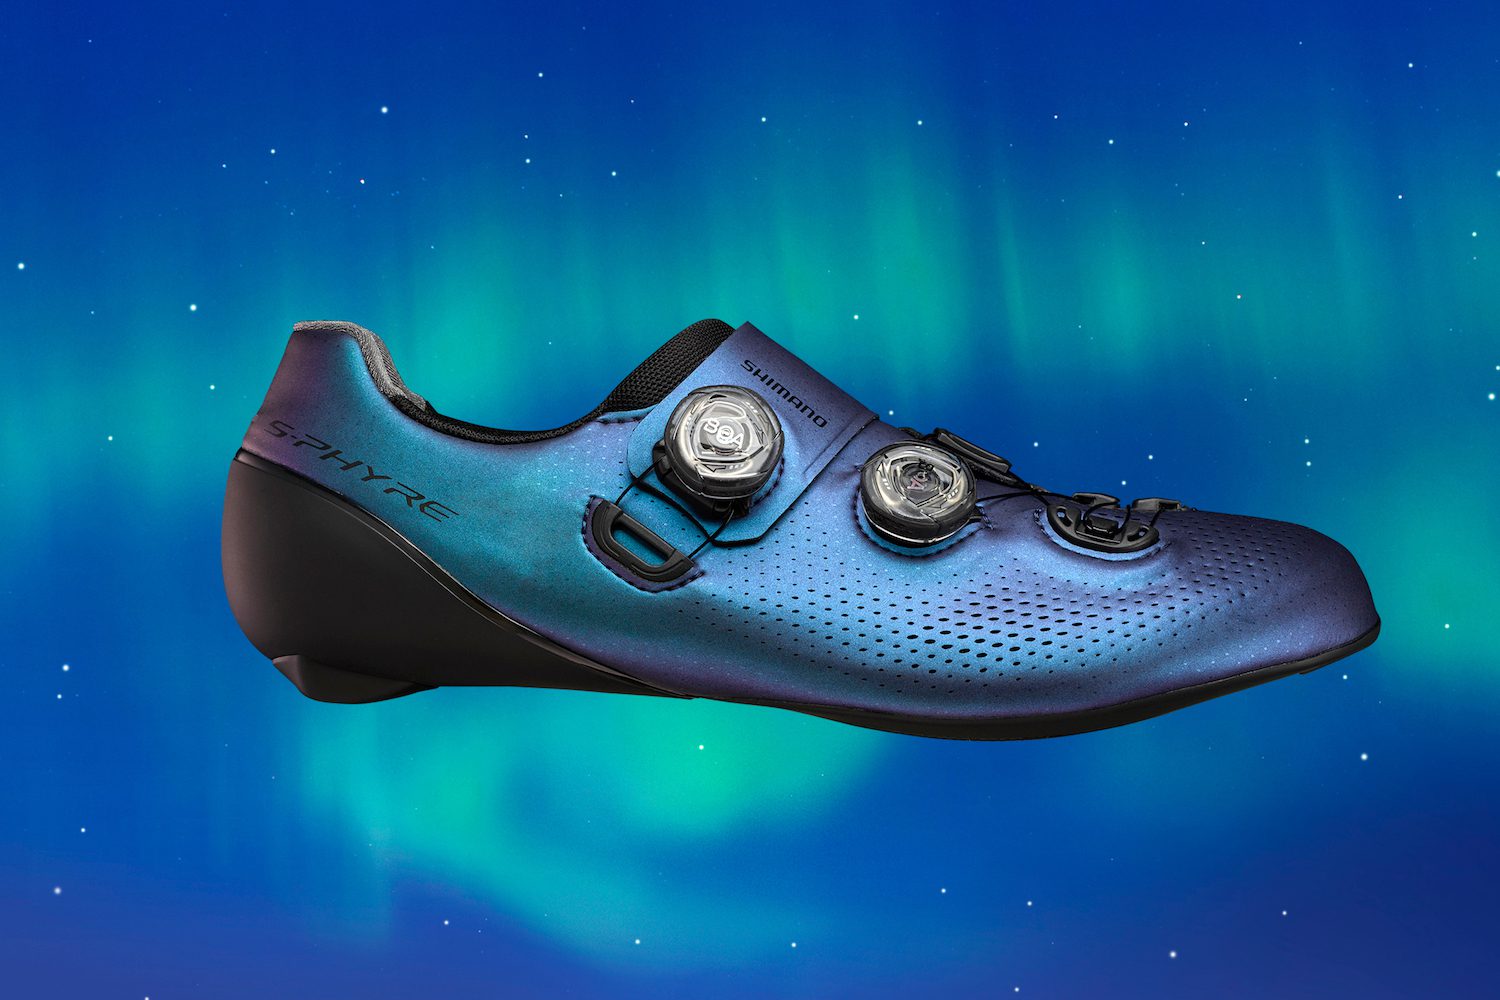 Shimano S-Phyre RC901 SPACE SHOE